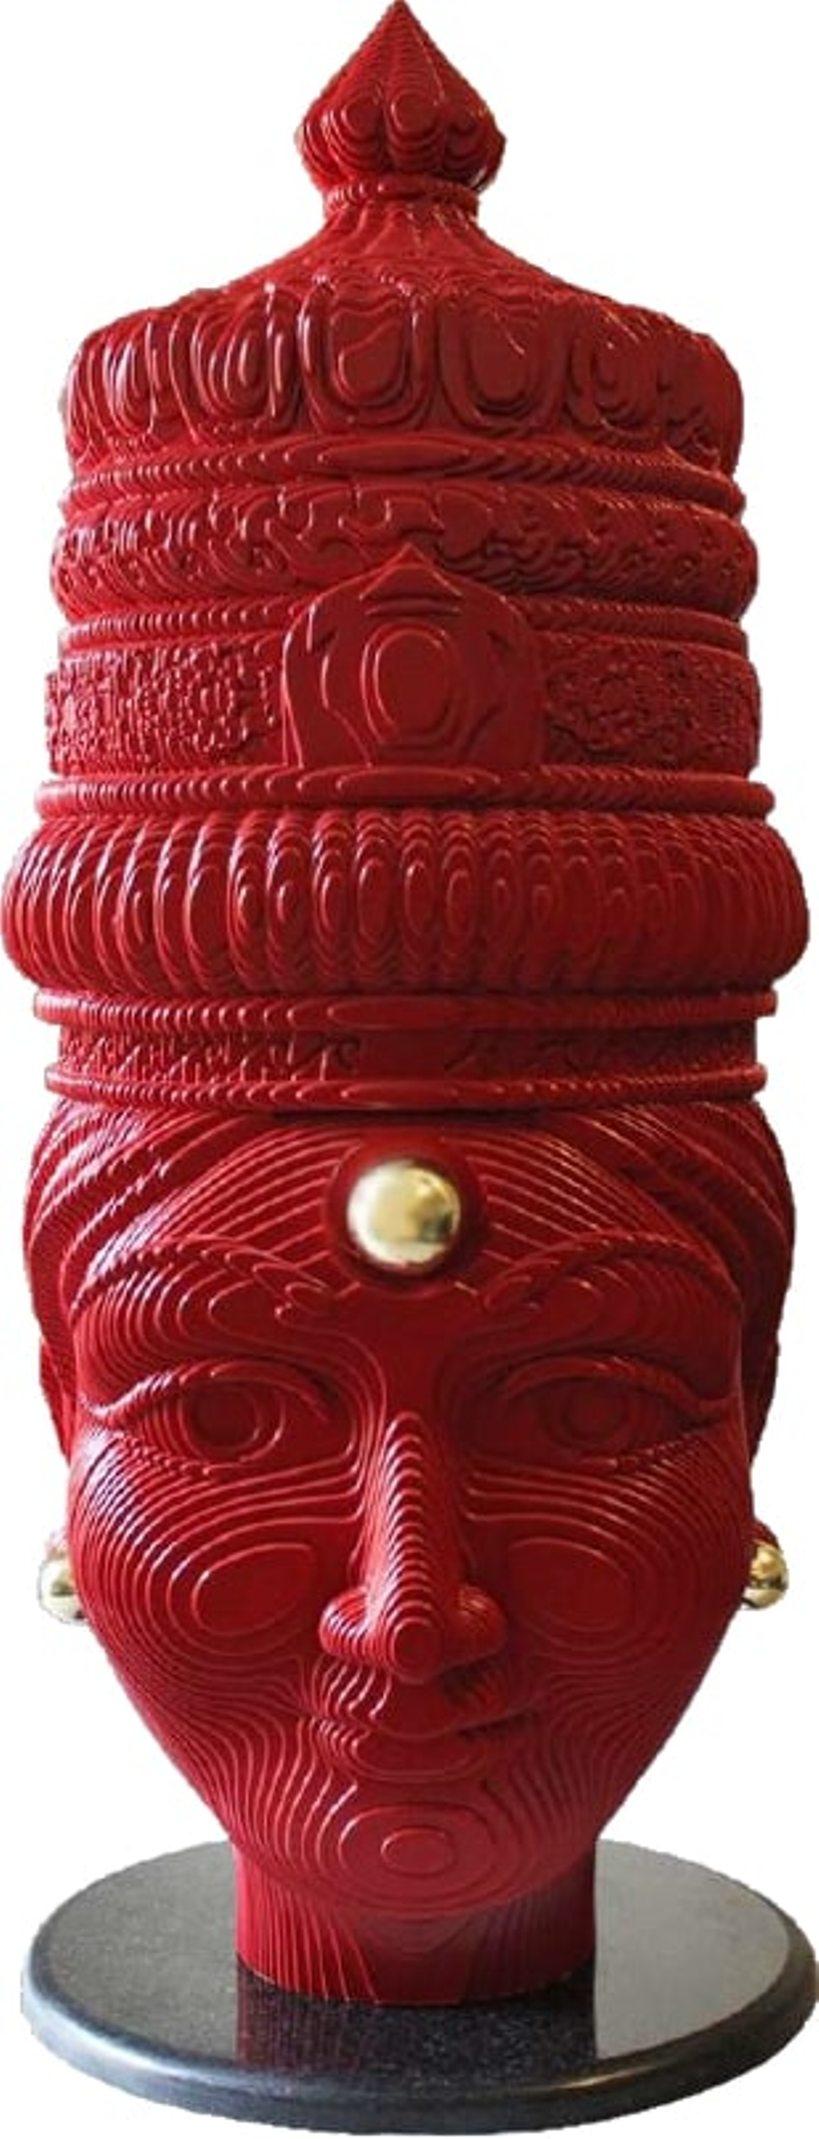 Naman Mahipal Figurative Sculpture - Women Face with Crown Bindi, MDF, Brass & Stone, Red Color by Indian "In Stock"